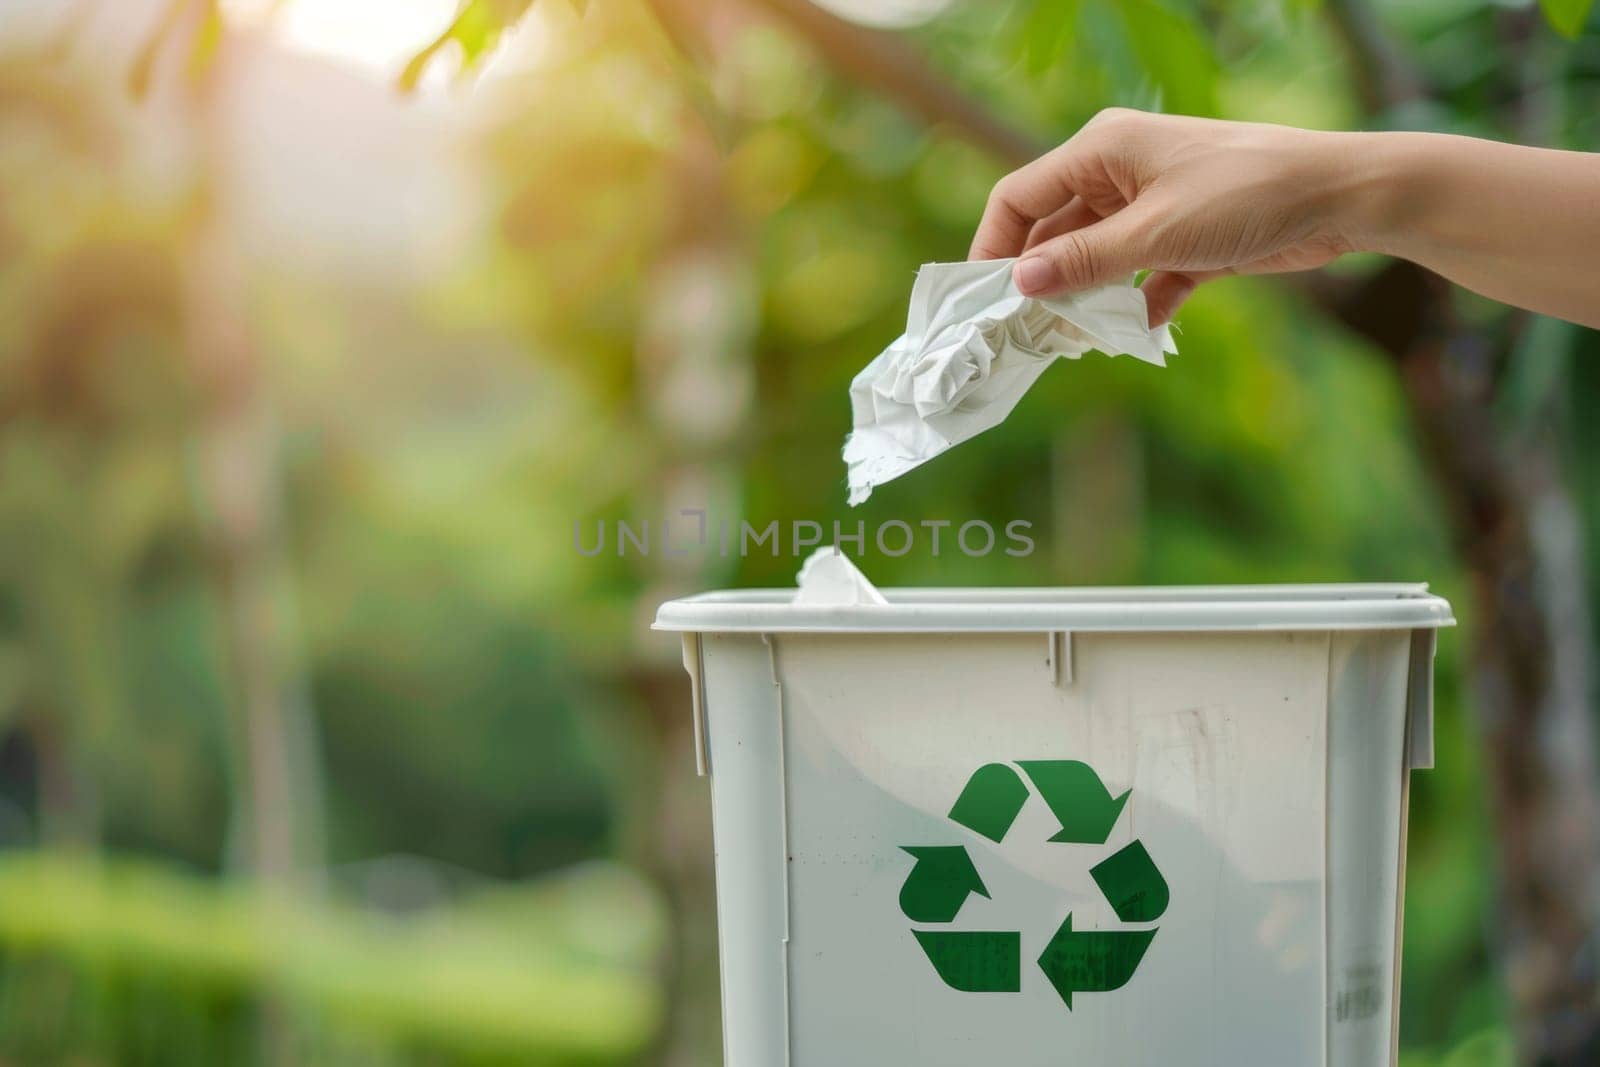 Hand putting waste paper into a trash bin with recycling icon. Save the planet concept.